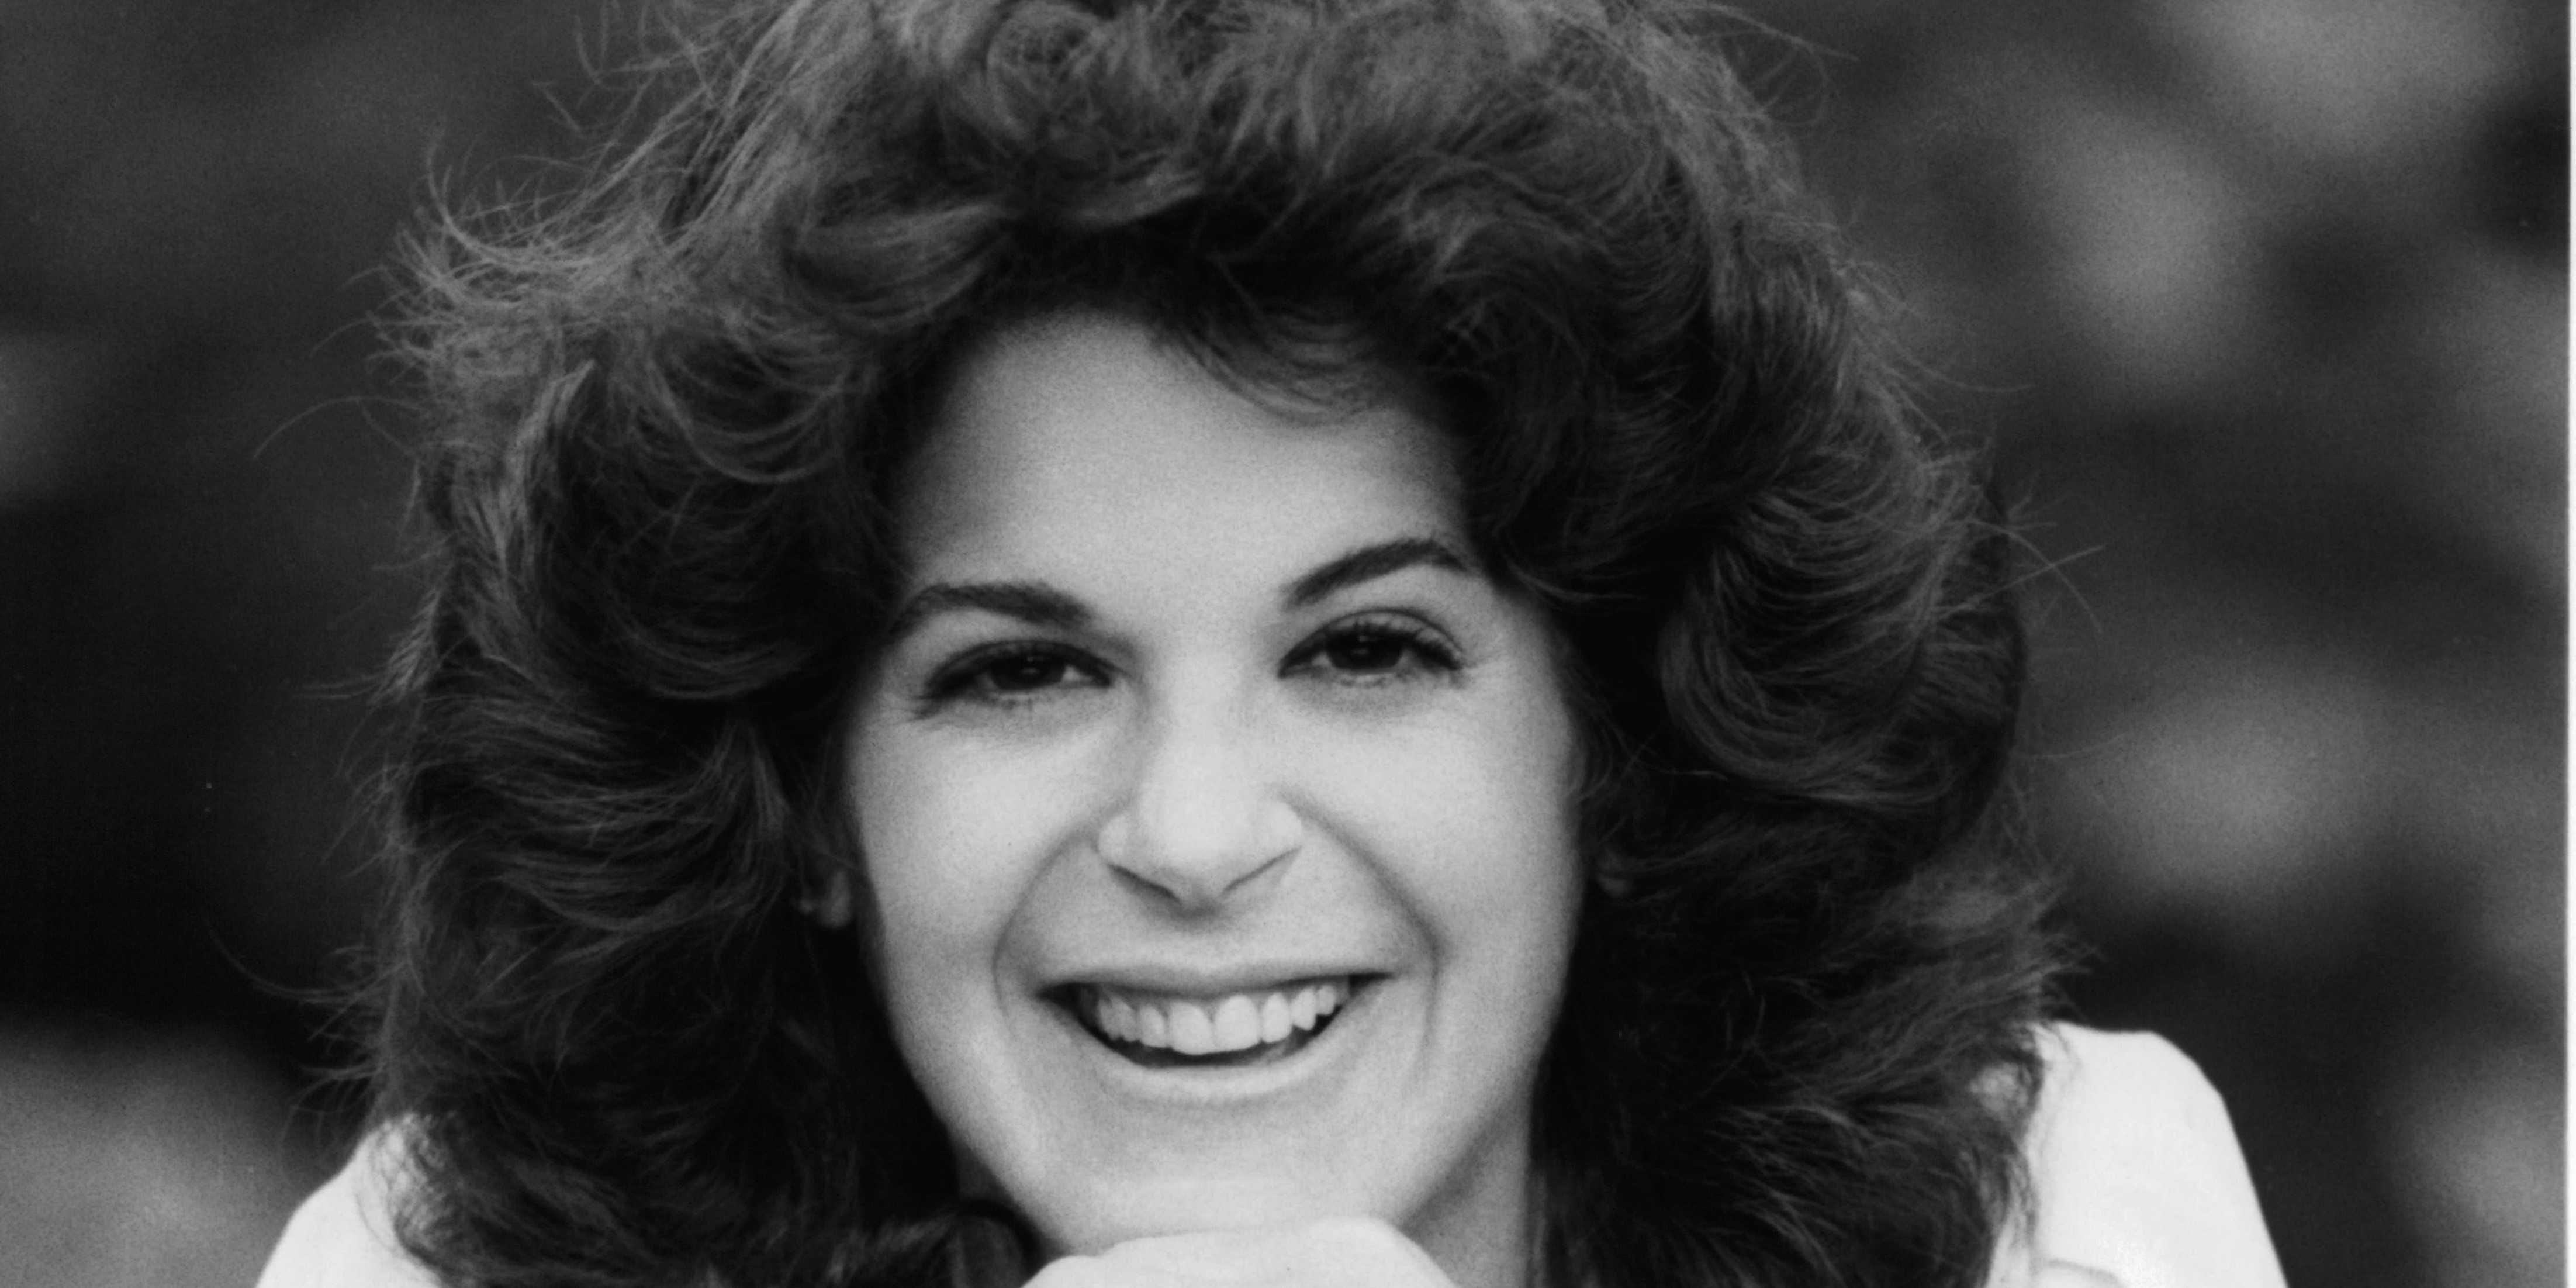 Gilda Radner - first-ever woman to host Saturday Night Live (SNL) show.